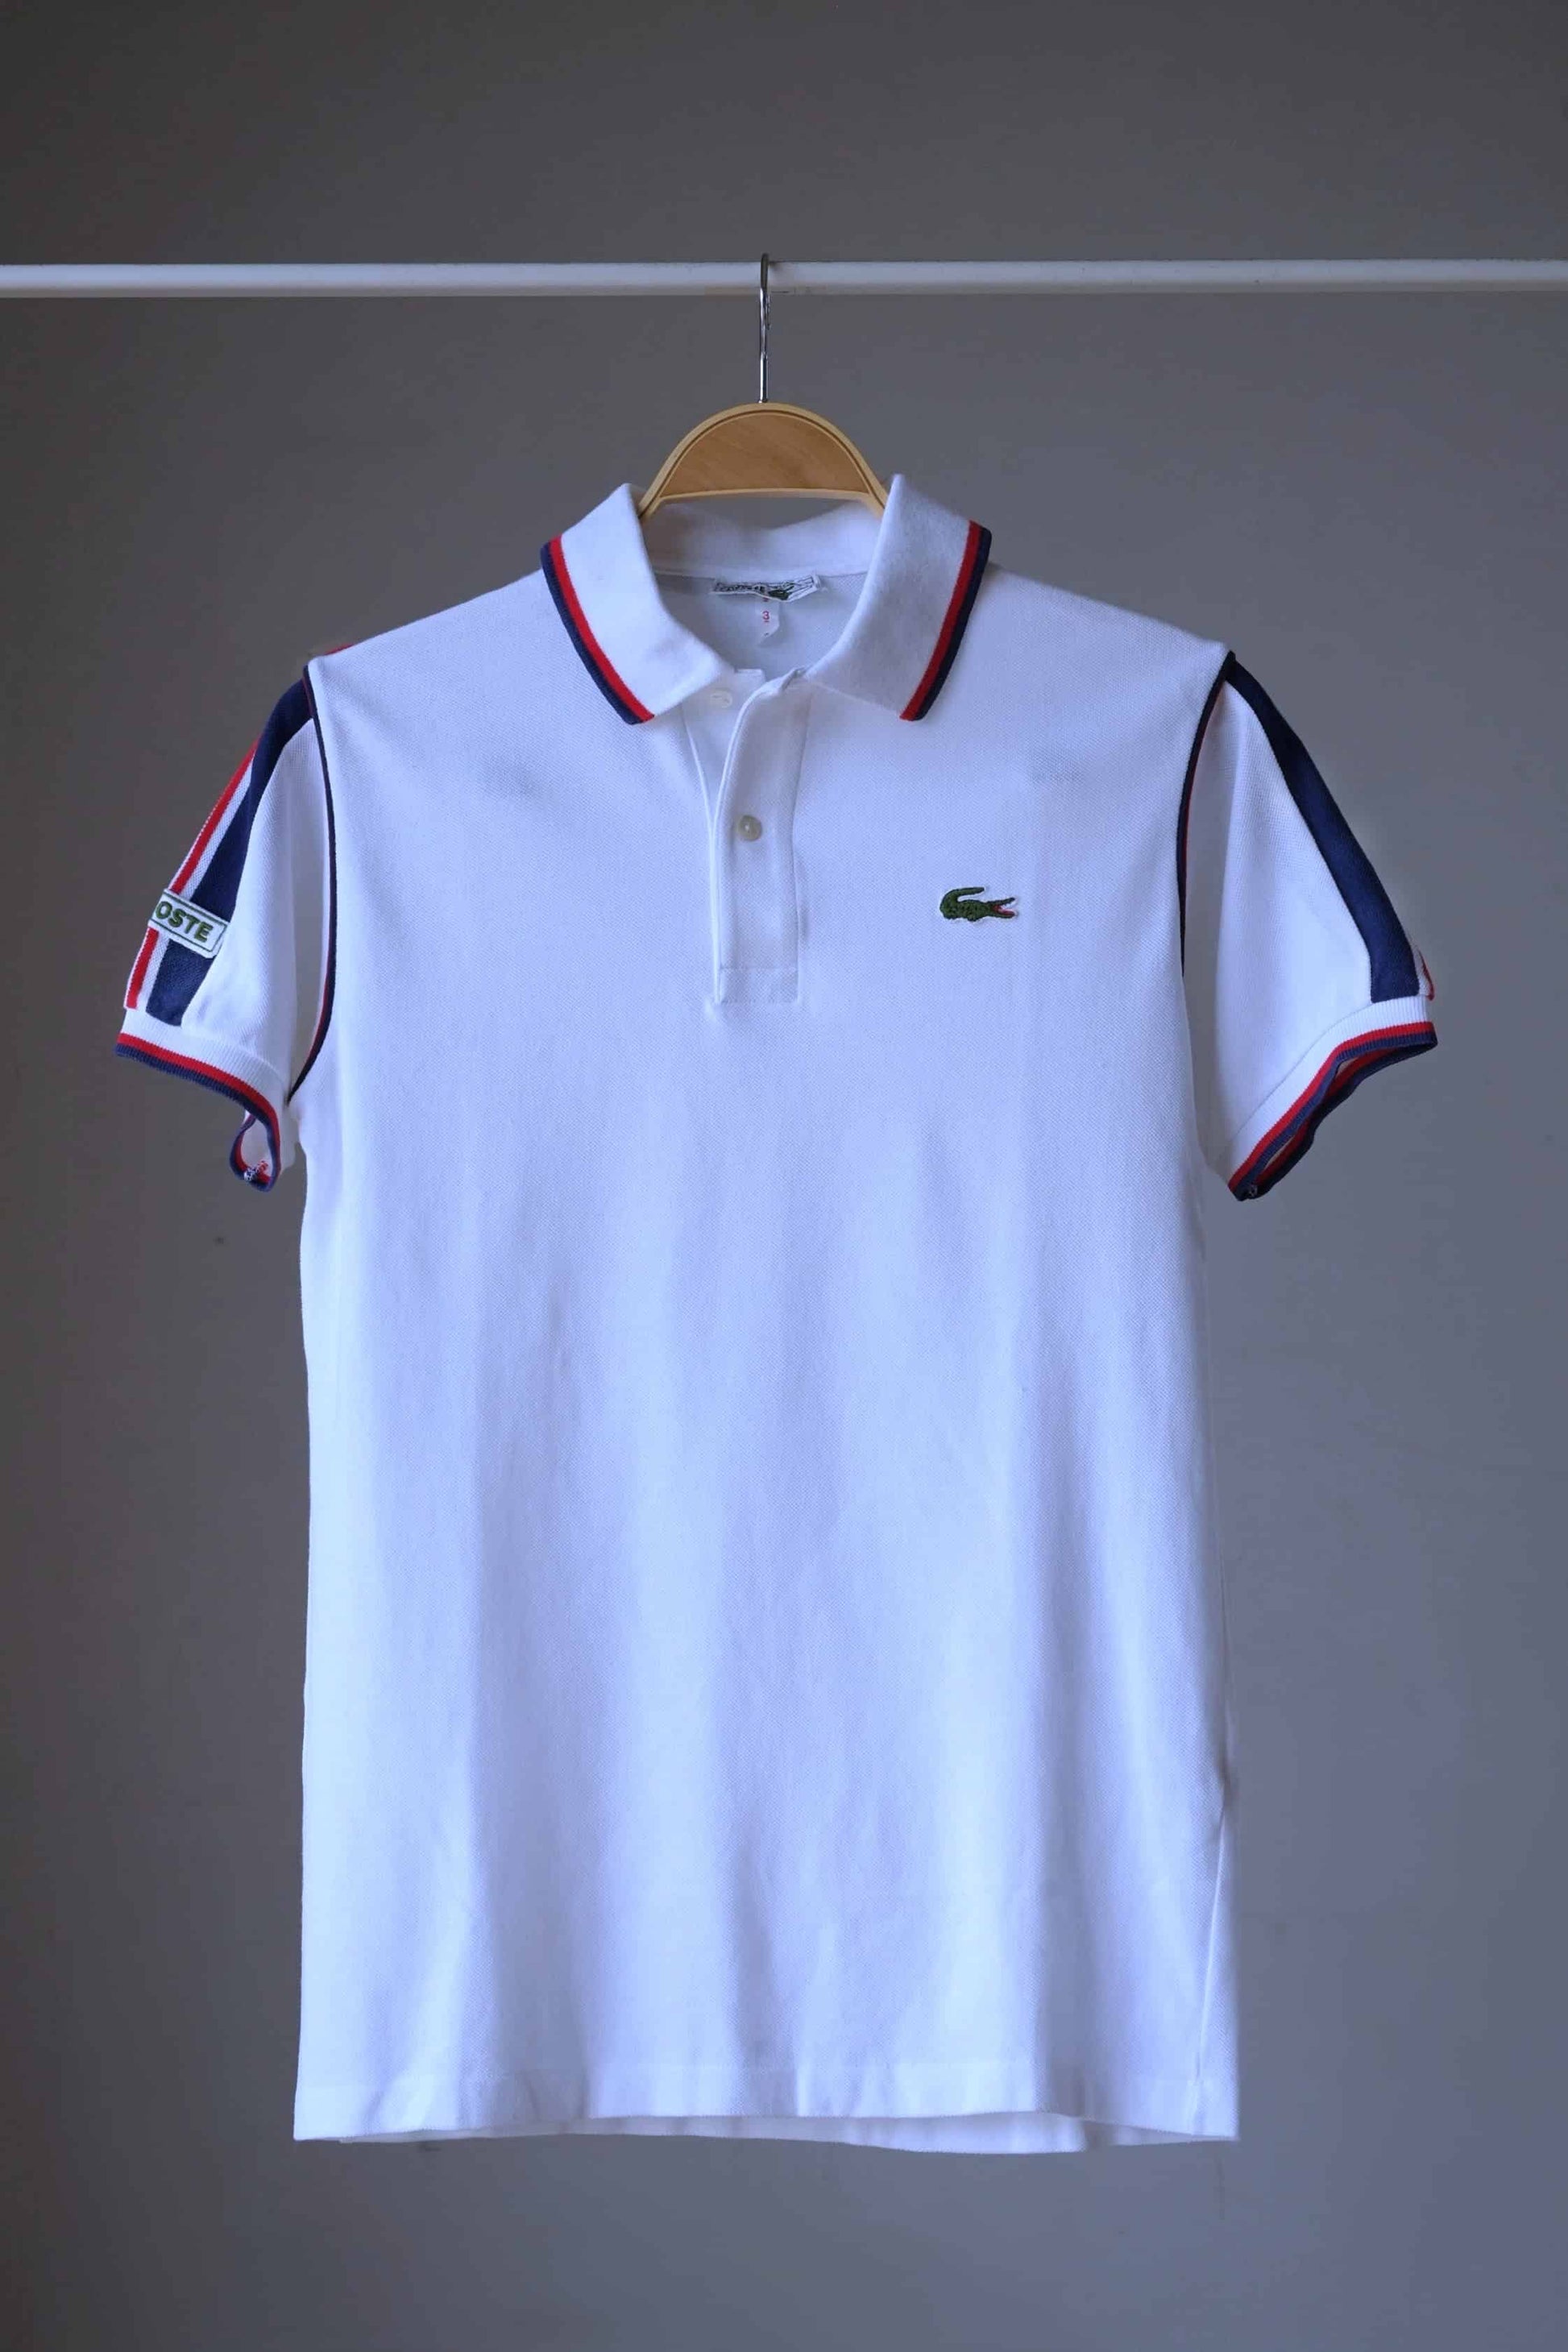 Lacoste vintage shirt in white and navy stripes on hanger